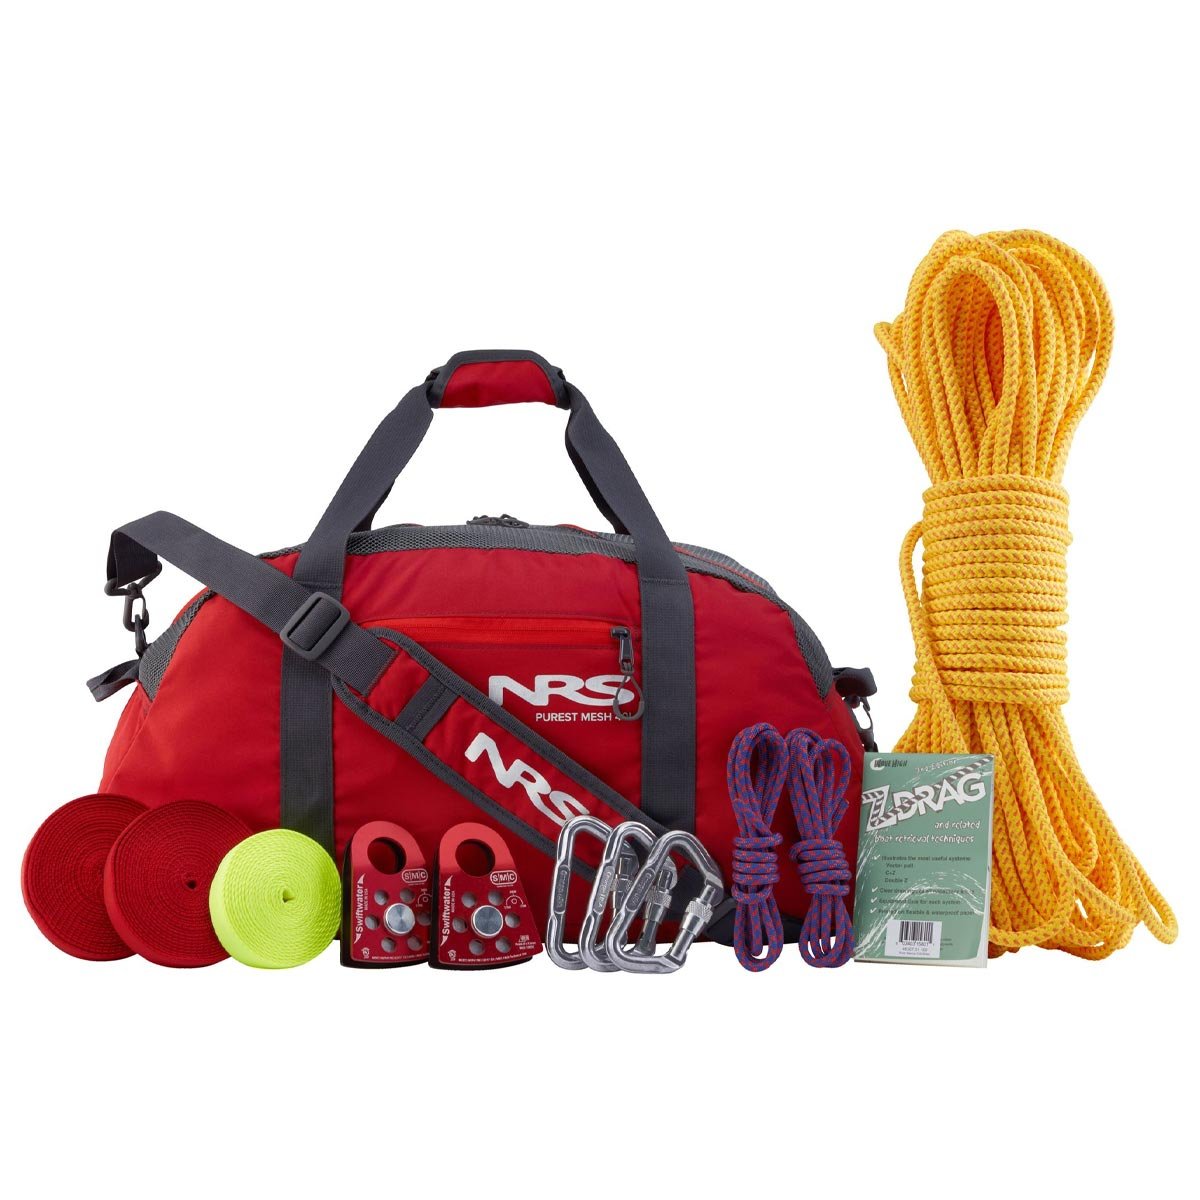 NRS NFPA Pro Rescue Throw Rope Orange One Size 141［並行輸入